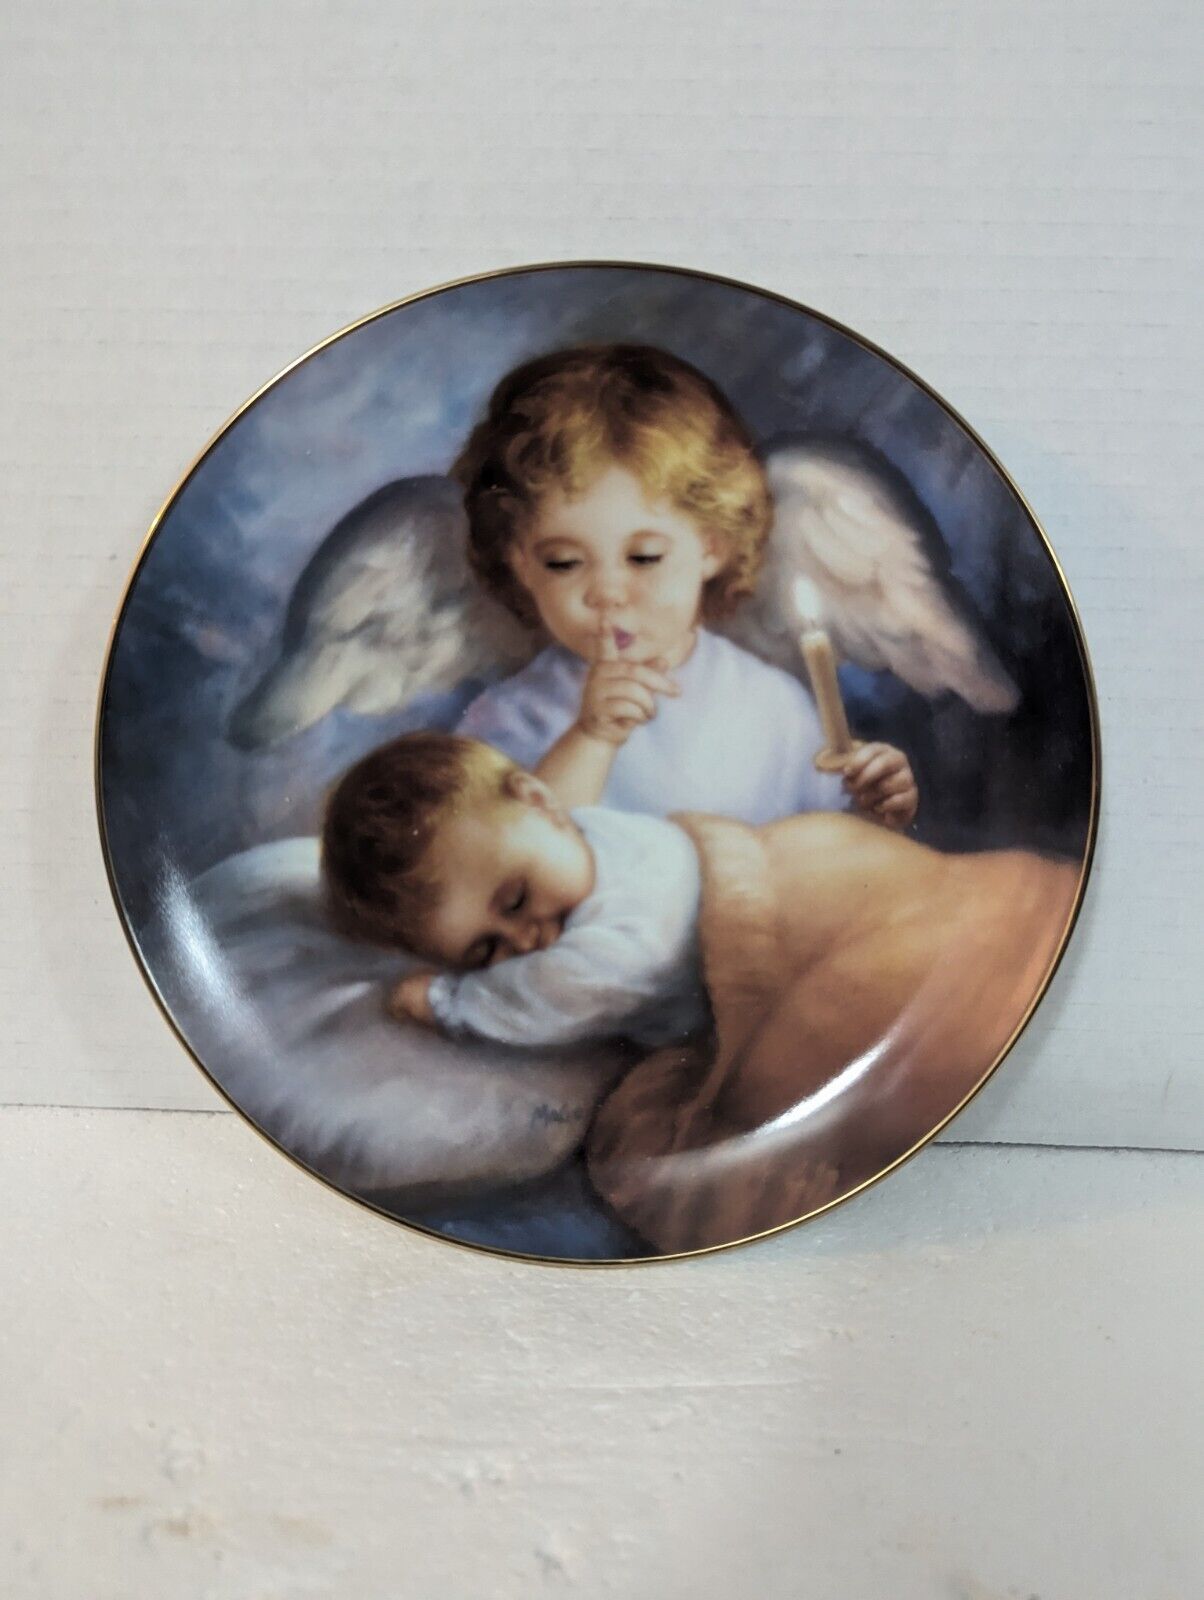 Hush-A-Bye Heavenly Angels Collector Plate Porcelain 23K Gold Trim 8” By MaGo